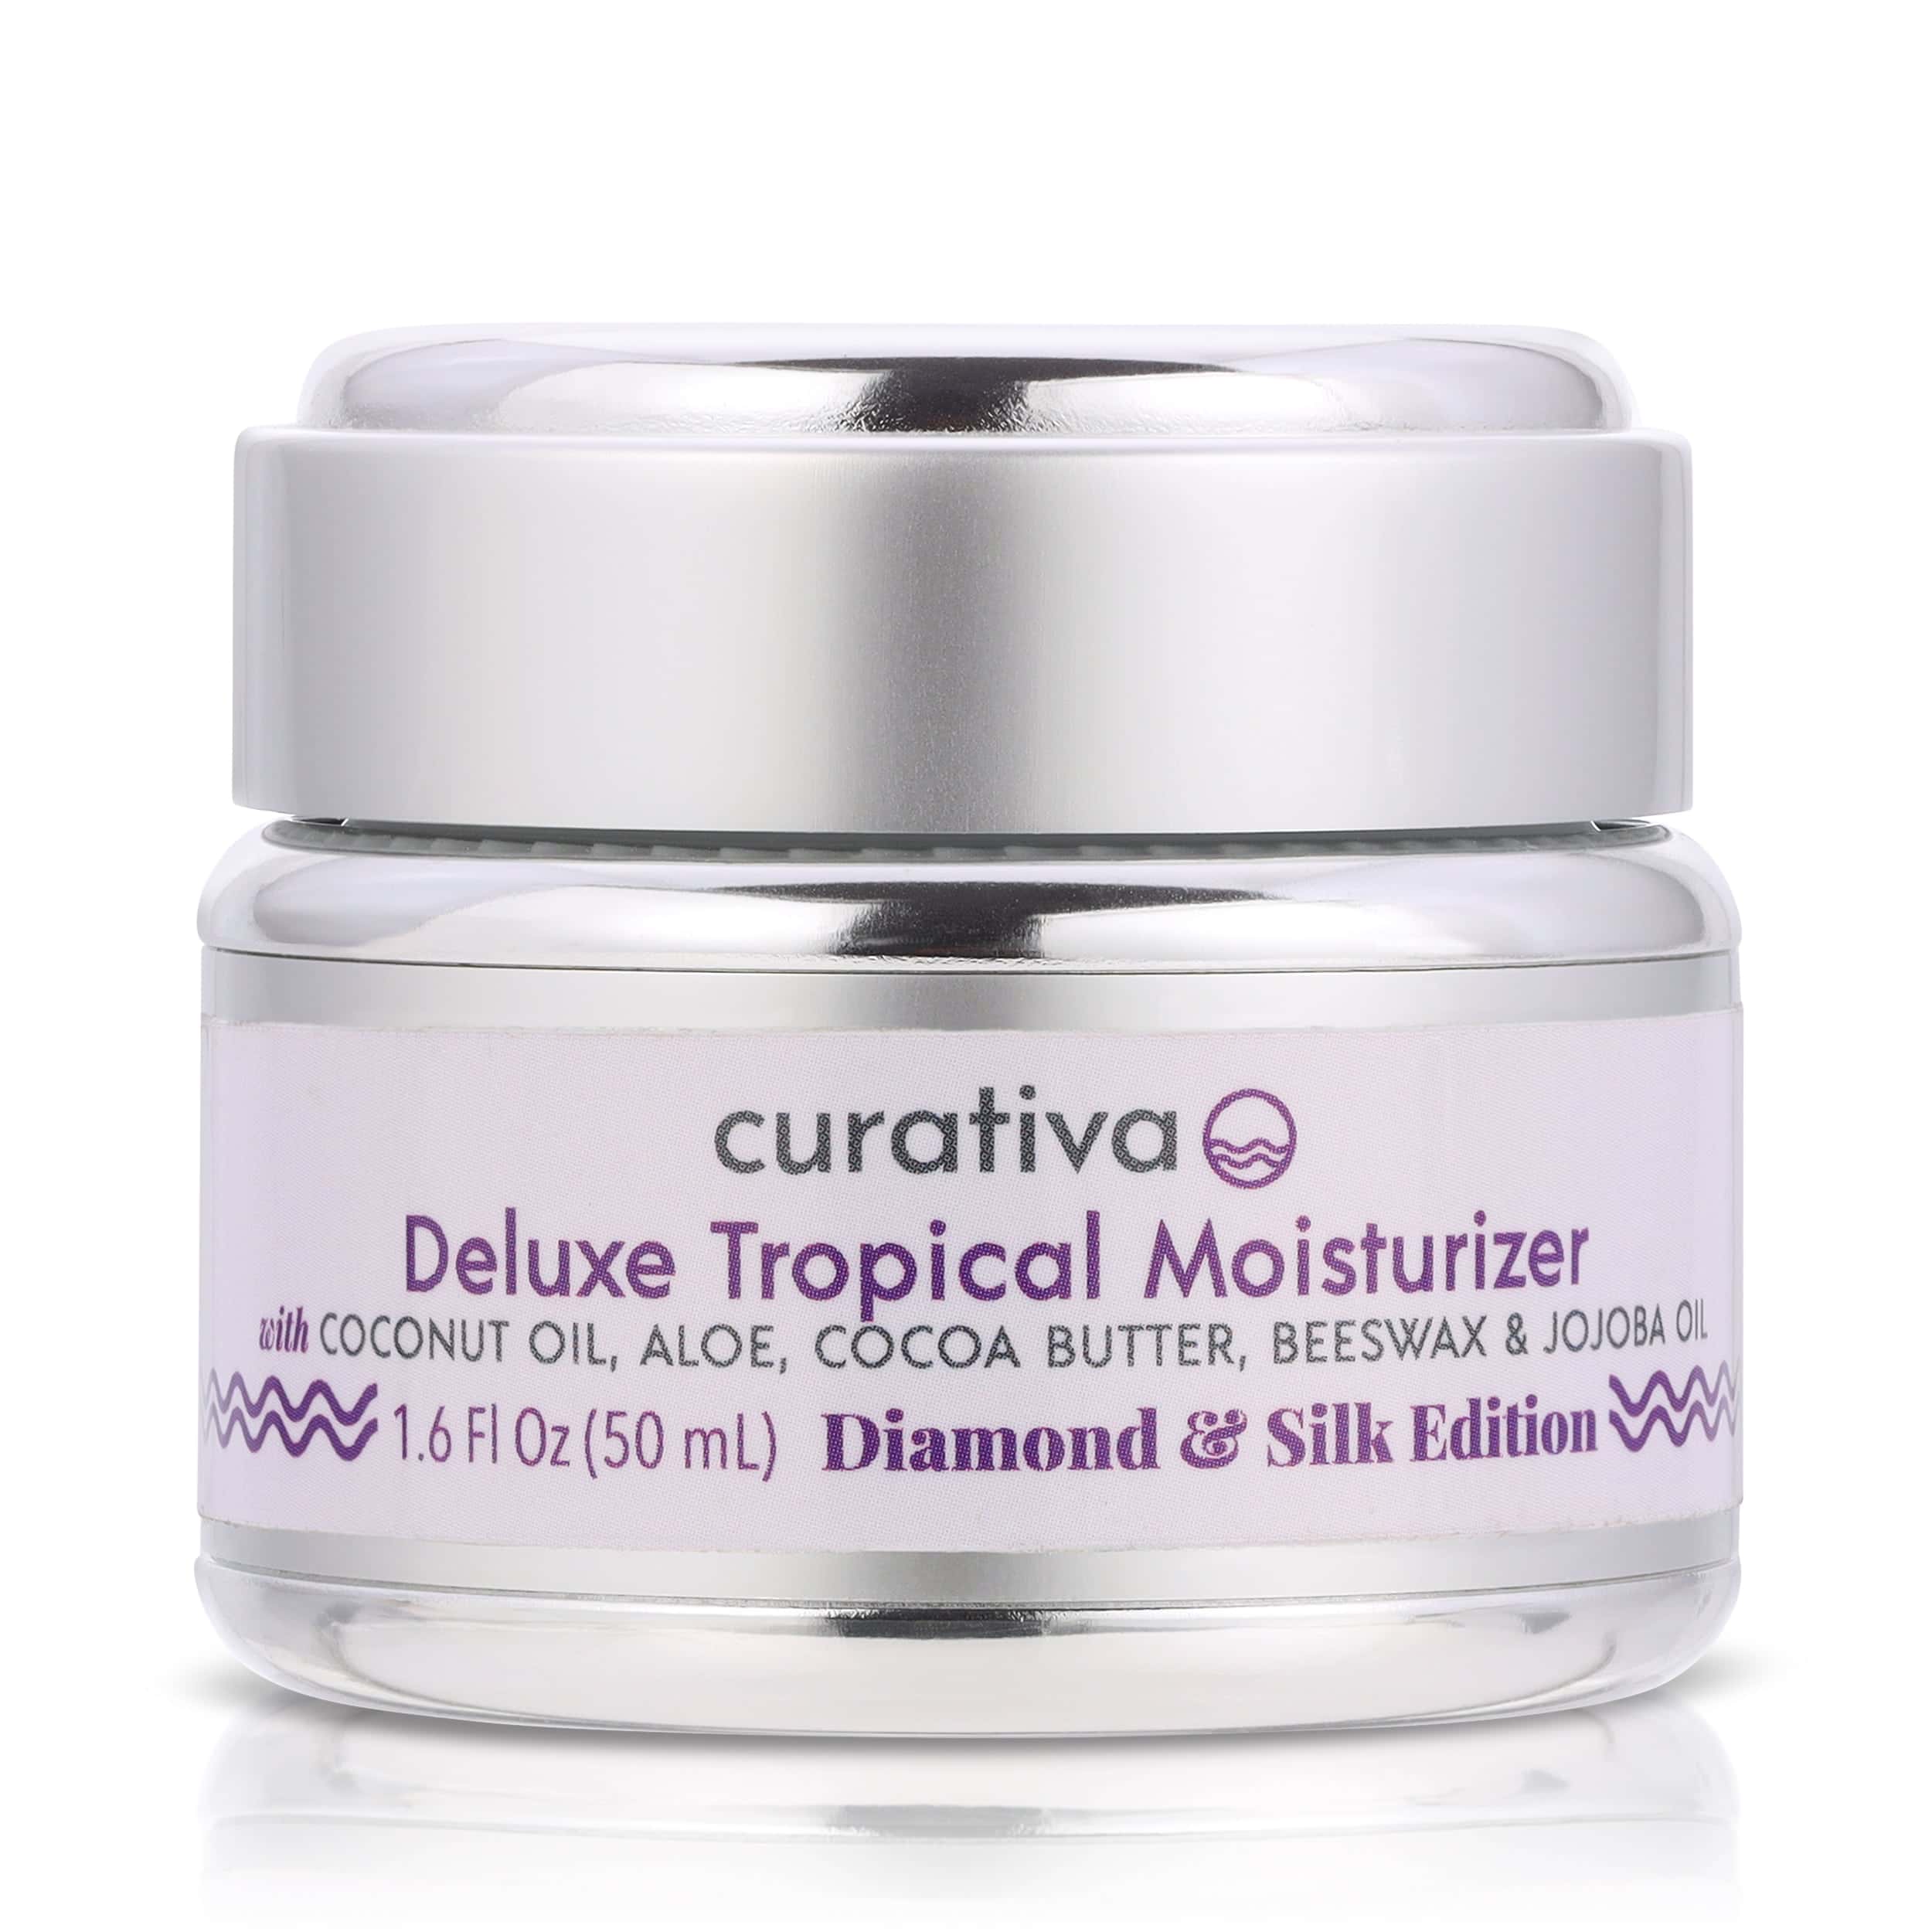 Deluxe Tropical Moisturizer